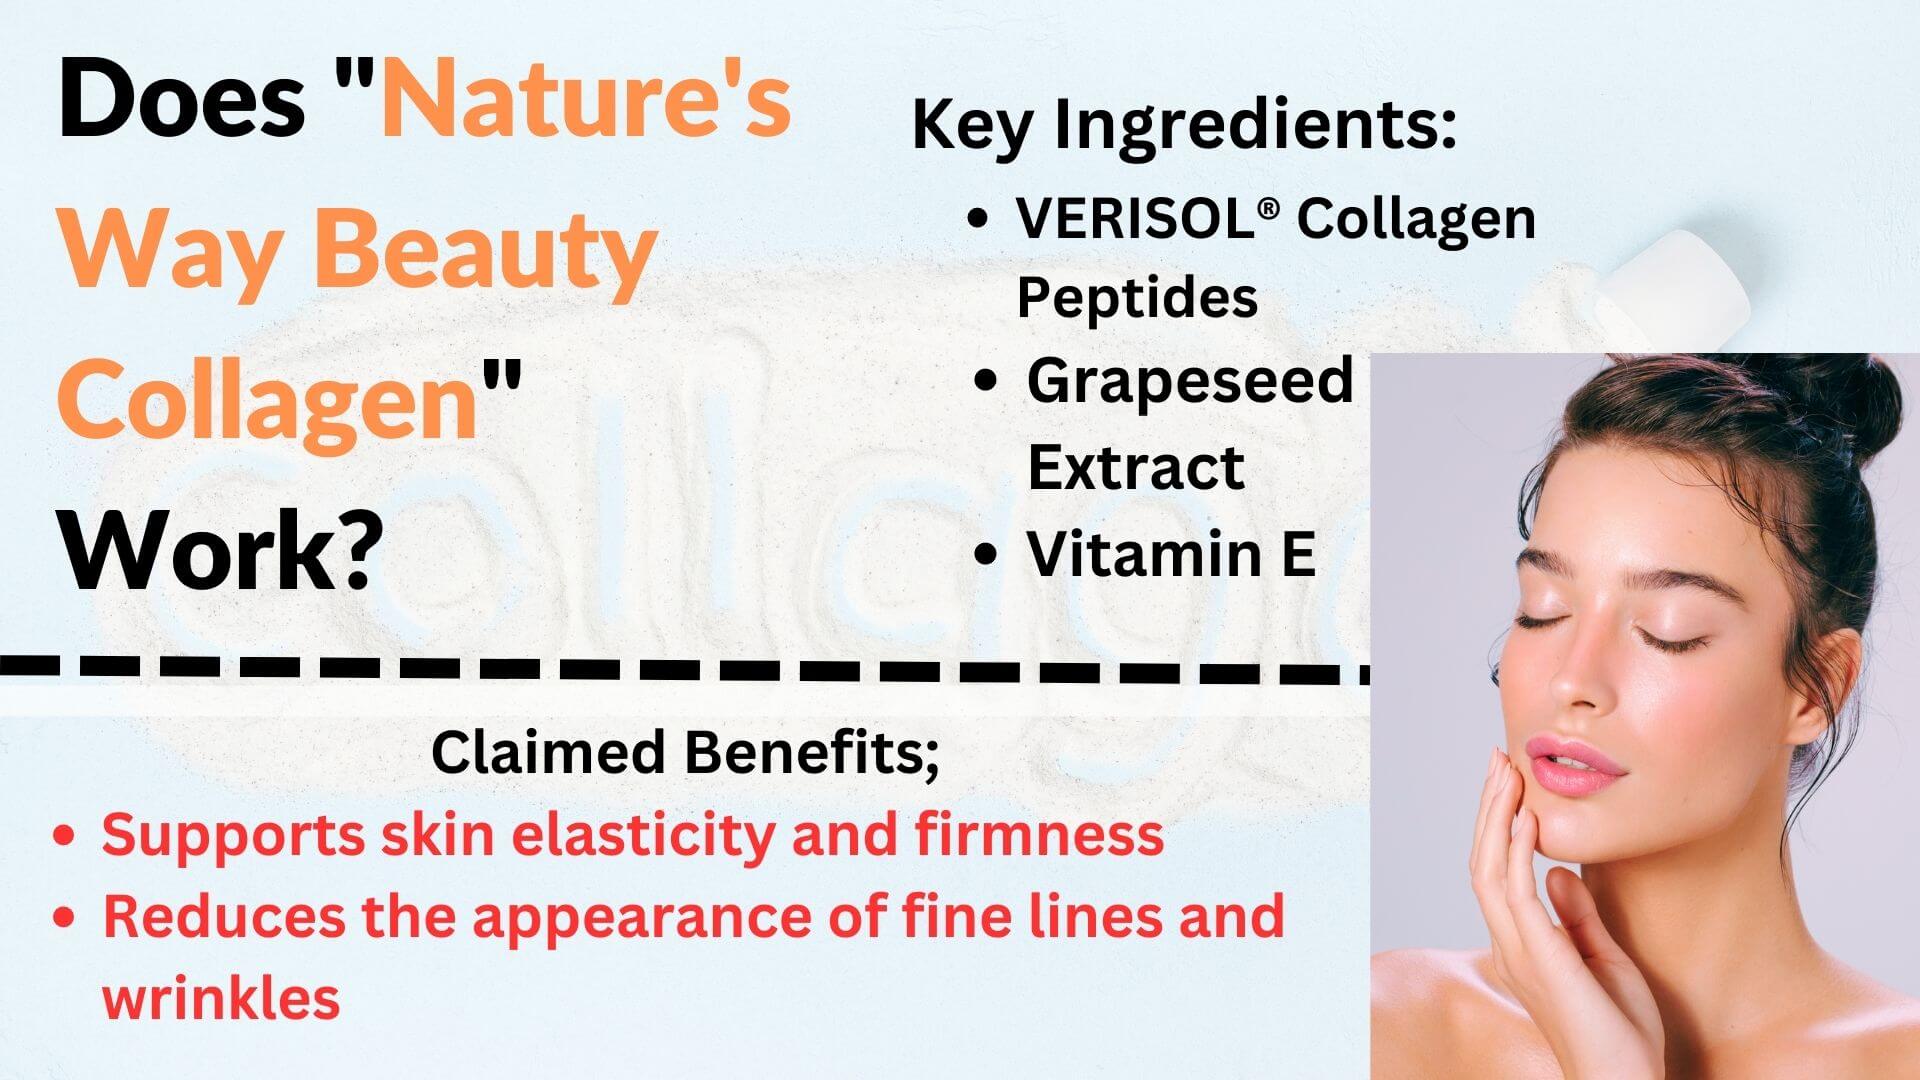 Does Nature's Way Beauty Collagen Work?